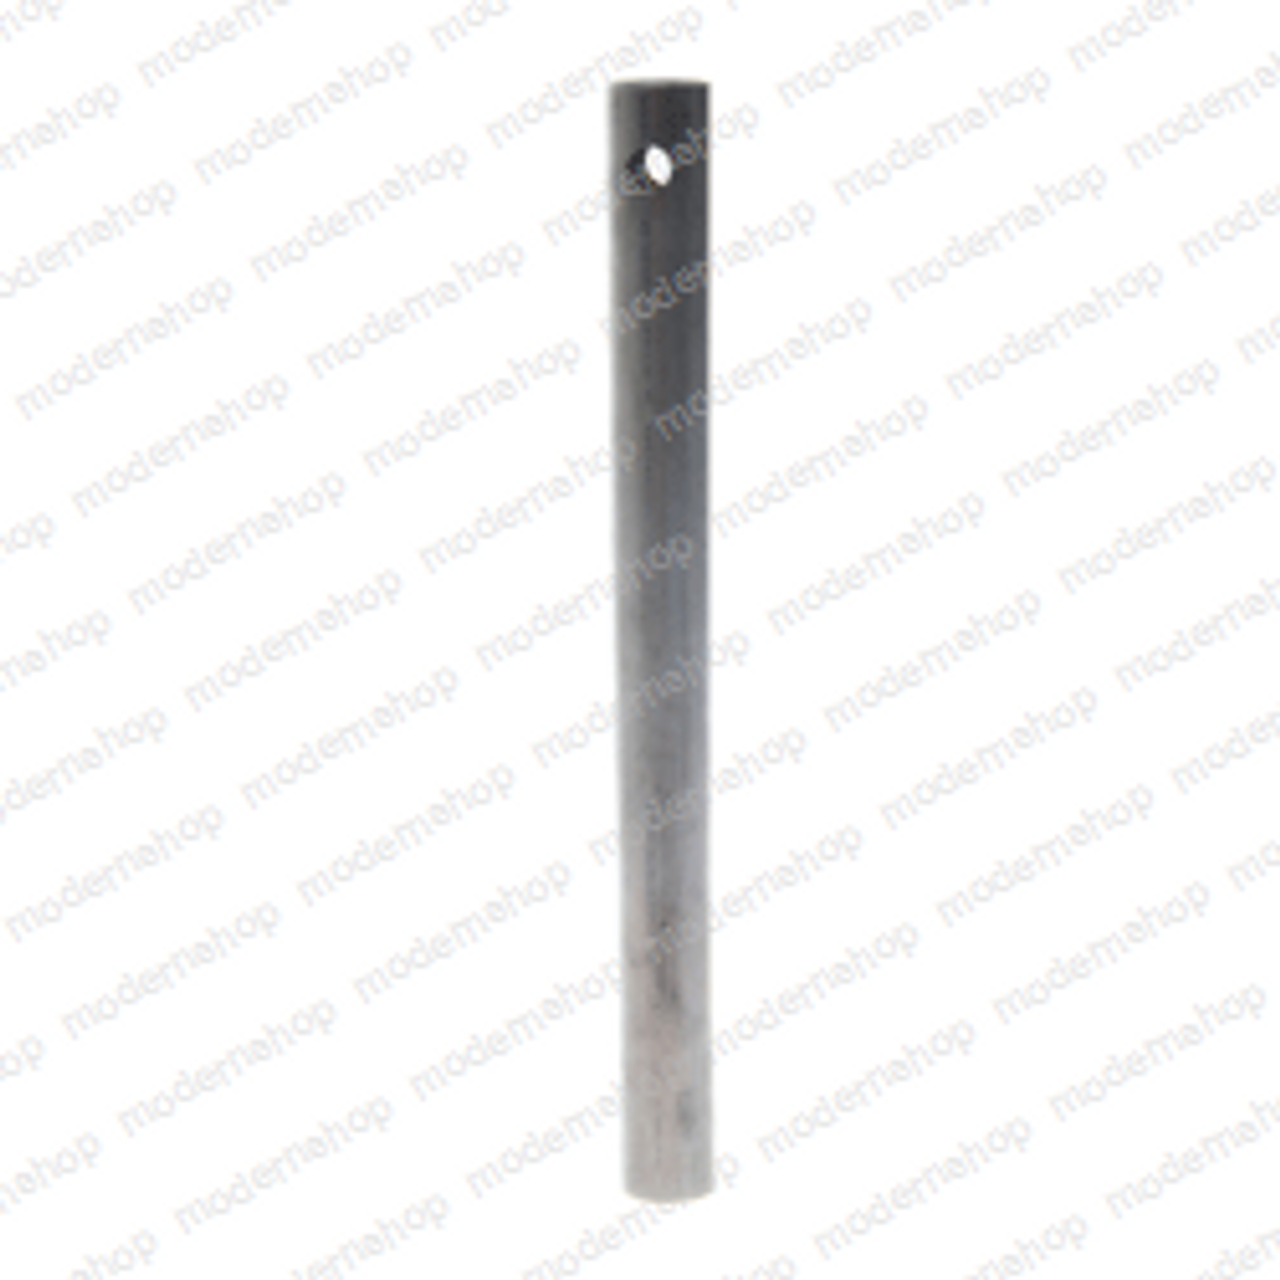 062884-002: Upright STRUT GAS SPRING TUBE OUTER